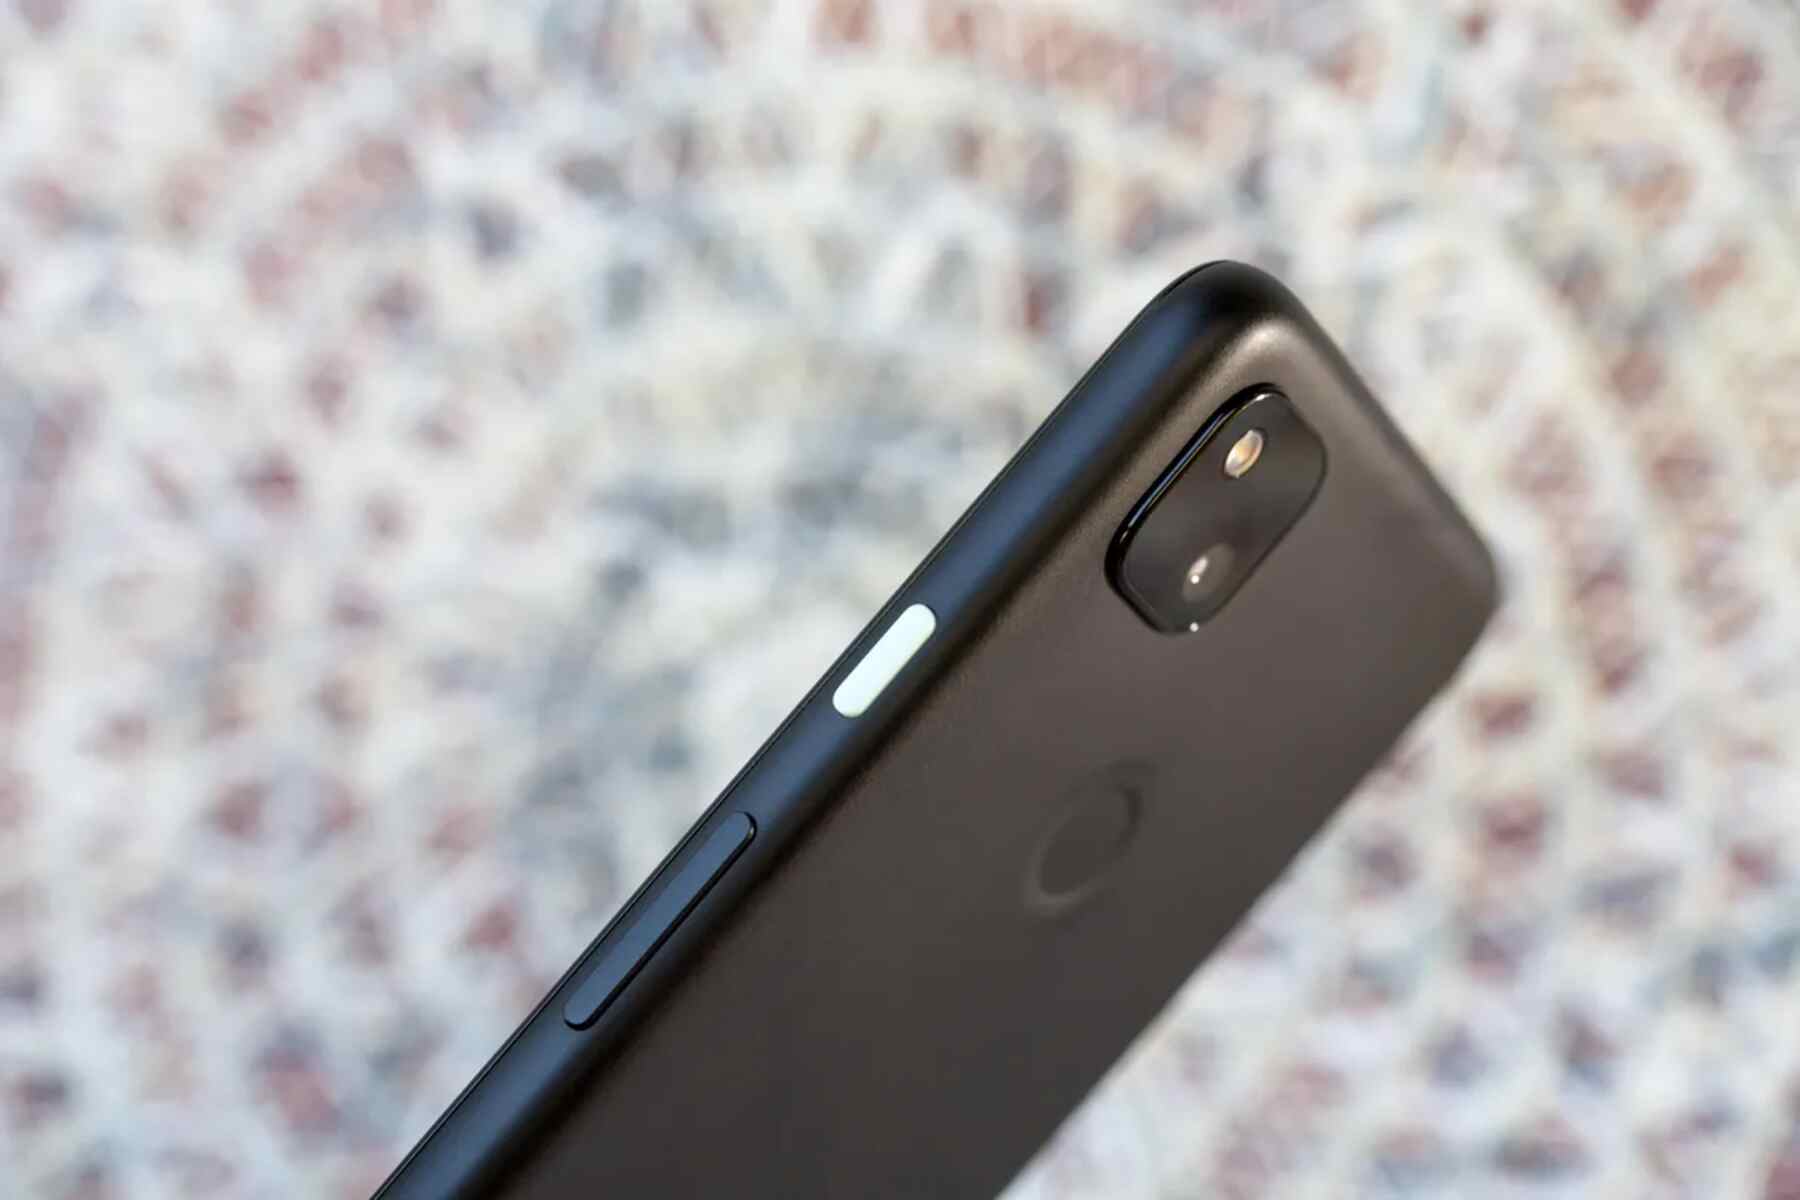 Managing Connectivity: Turning Off Mobile Data On Pixel 4A